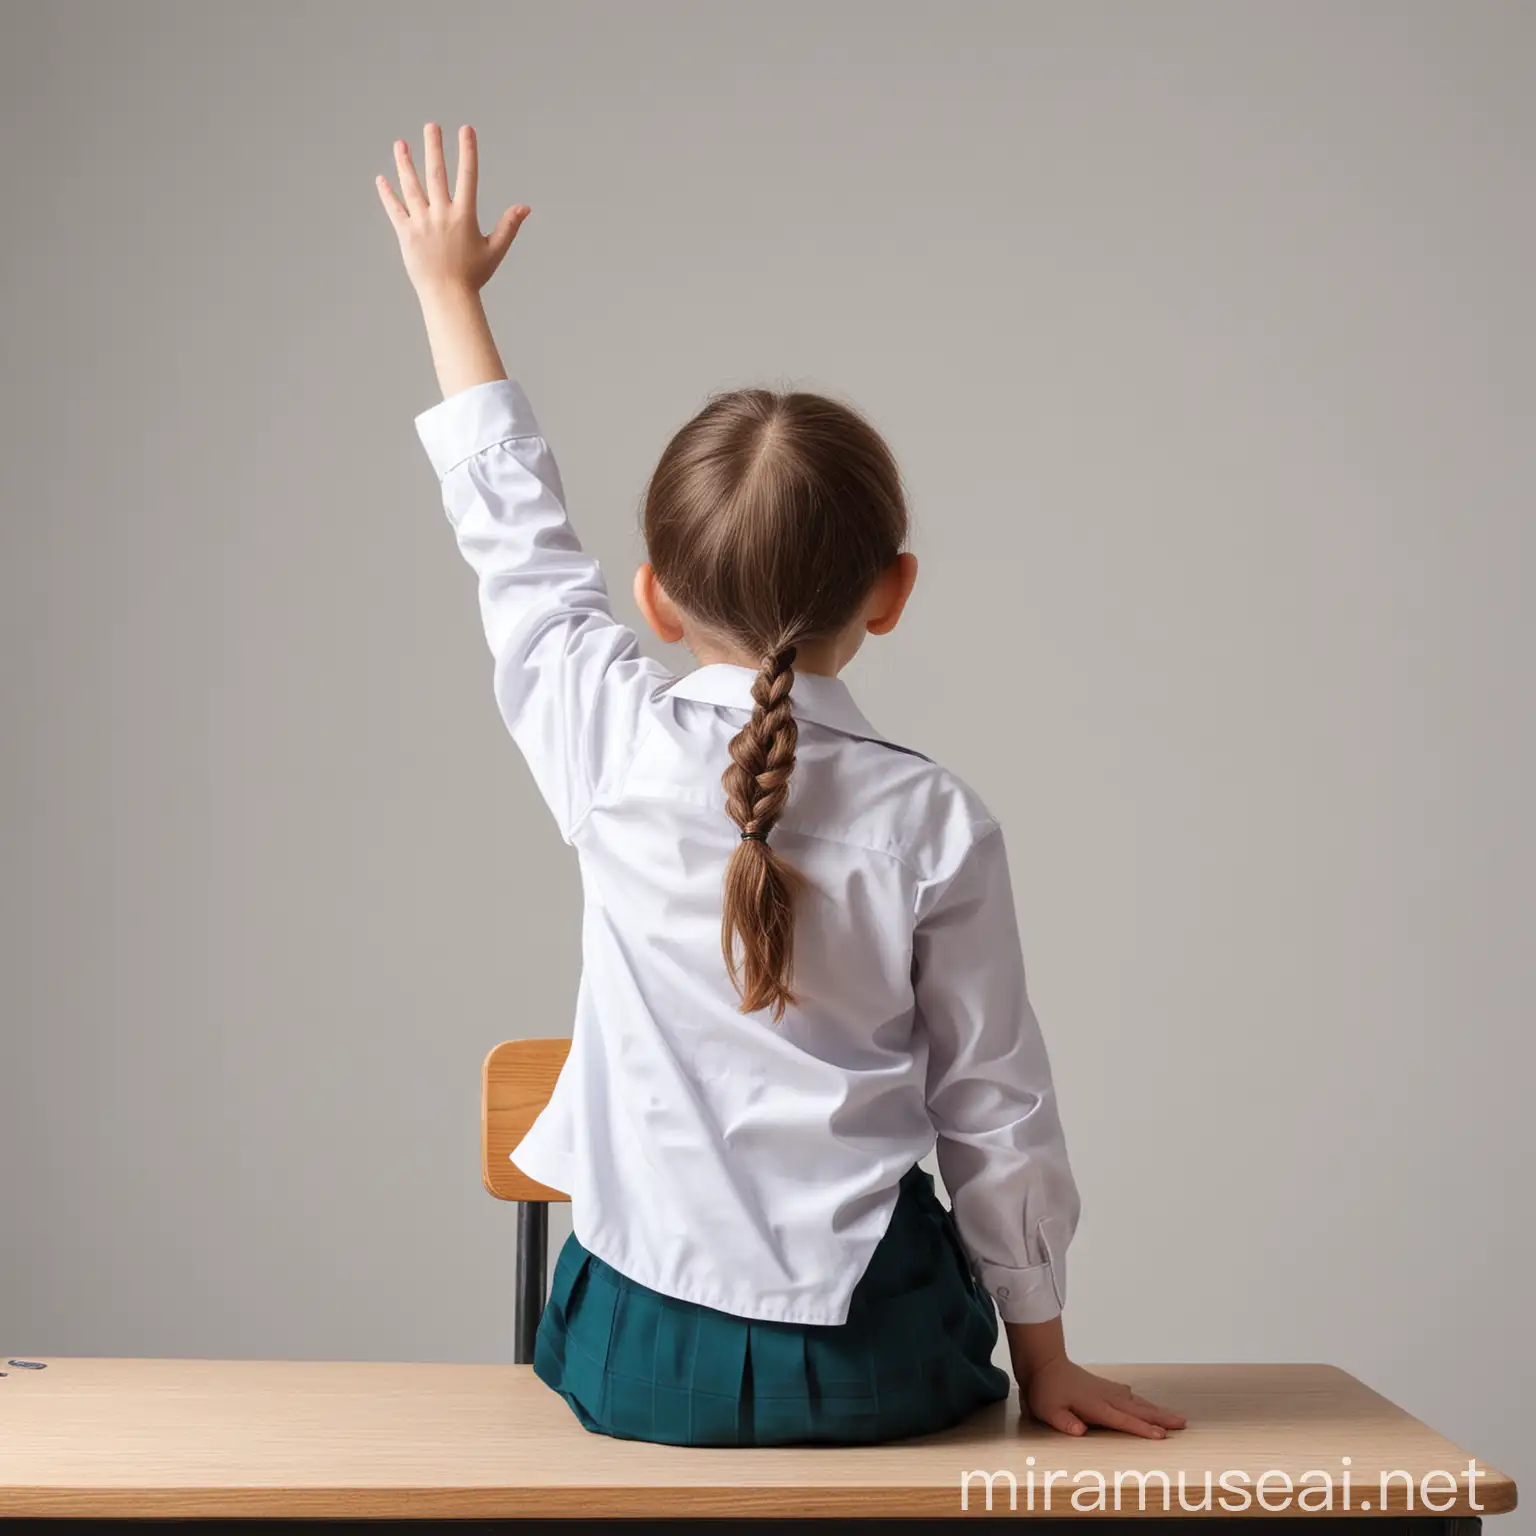 a child in school uniform, sitting on a school desk, view from behind, raises her hand, white background